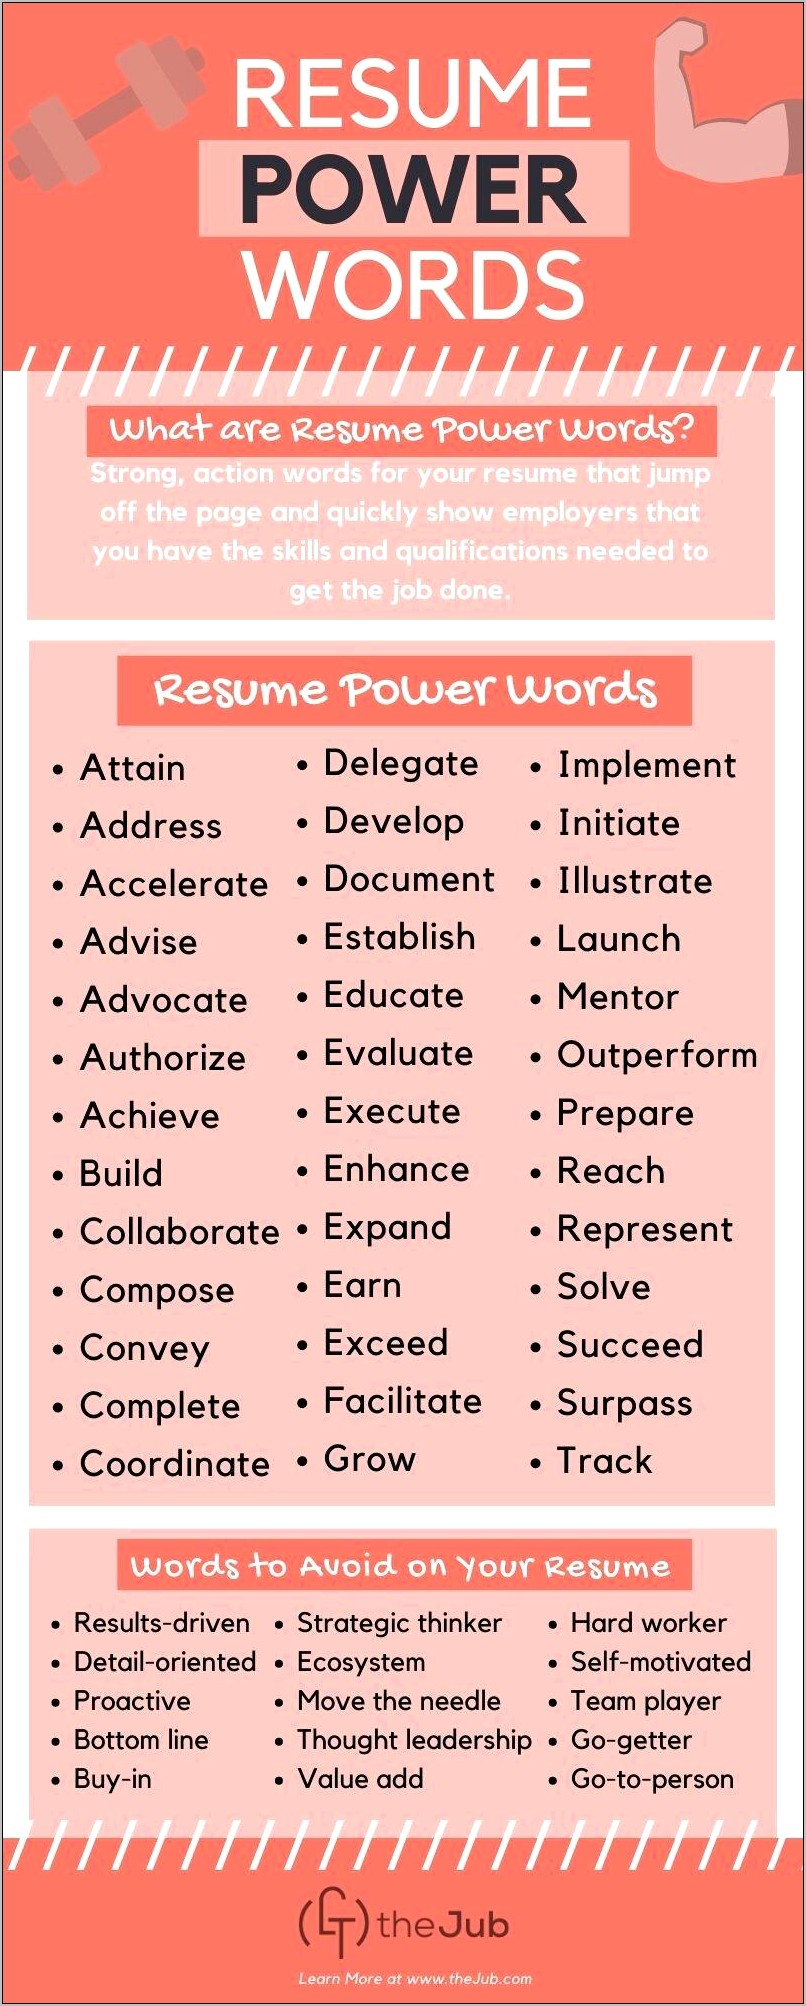 Skills Words To Use On A Resume